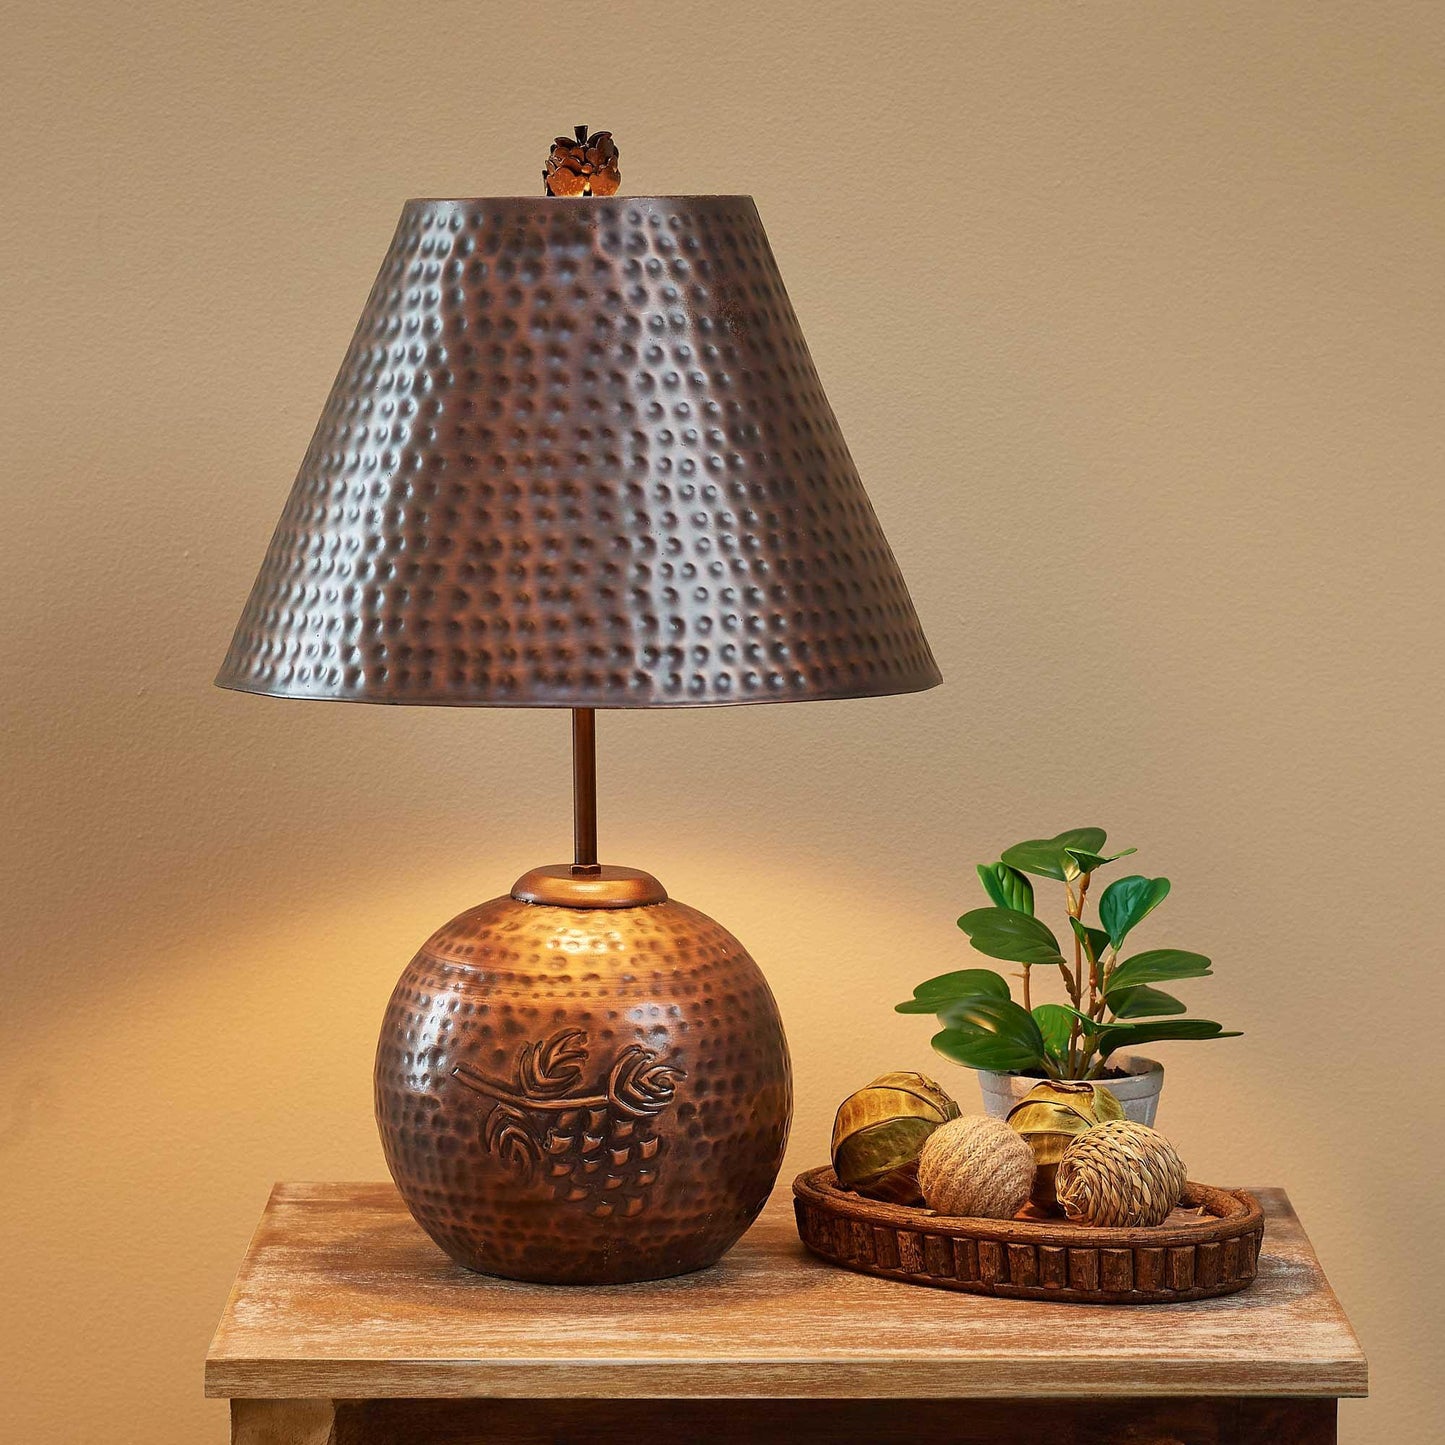 Copper Pine Hammered Table Lamp - Wild Wings